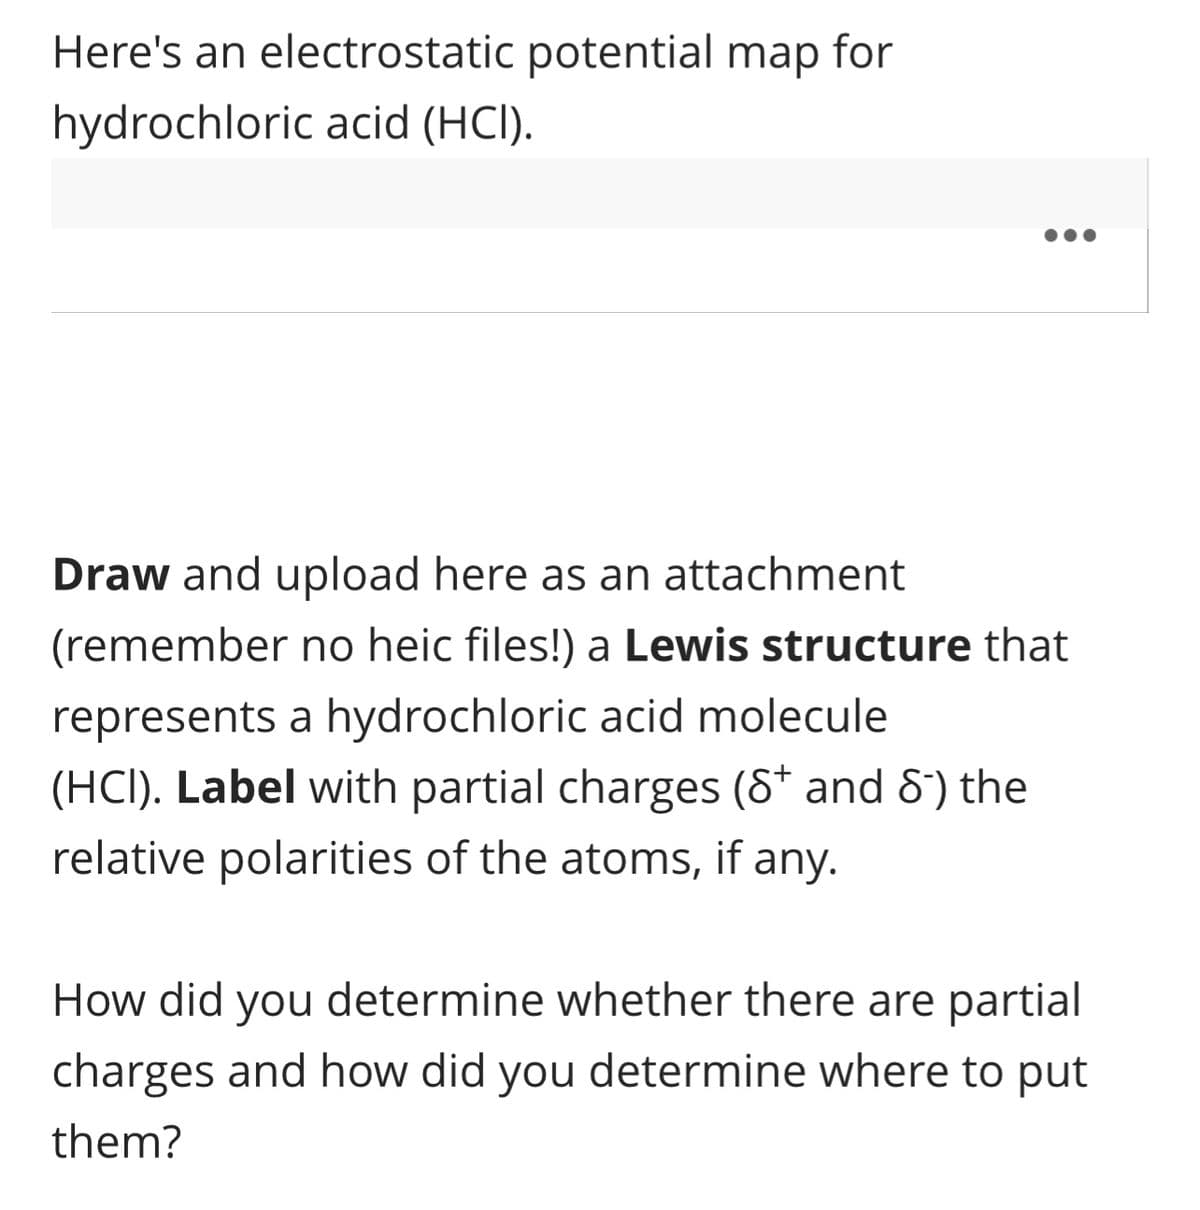 Here's an electrostatic potential map for
hydrochloric acid (HCI).
:
Draw and upload here as an attachment
(remember no heic files!) a Lewis structure that
represents a hydrochloric acid molecule
(HCI). Label with partial charges (8* and 8) the
relative polarities of the atoms, if any.
How did you determine whether there are partial
charges and how did you determine where to put
them?